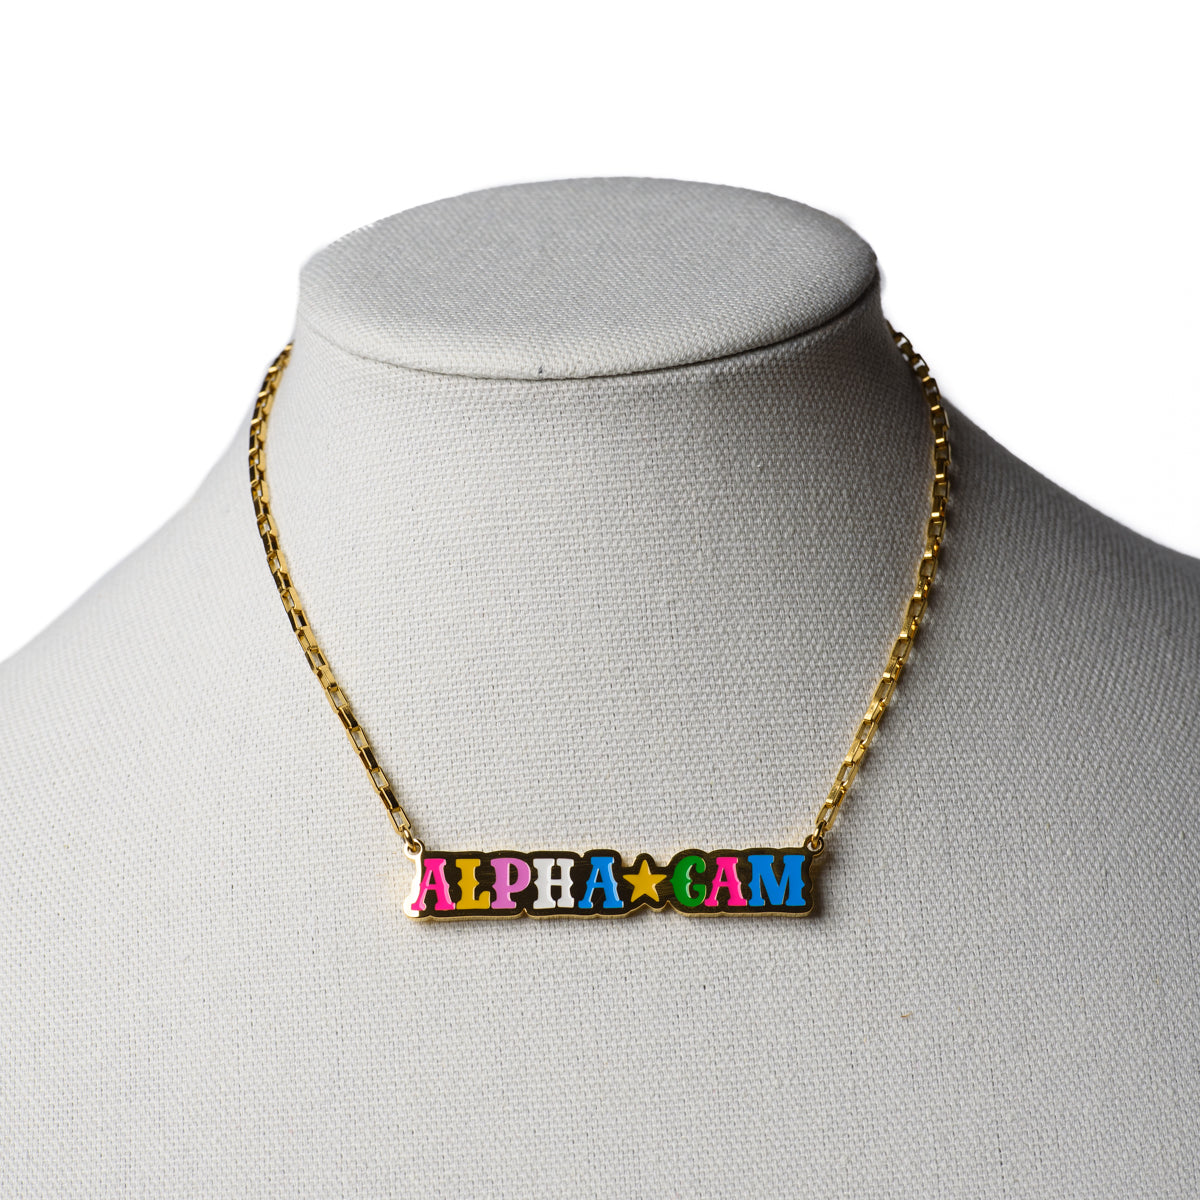 ALPHA GAM "Oh My Stars" Gold Box Chain Necklace